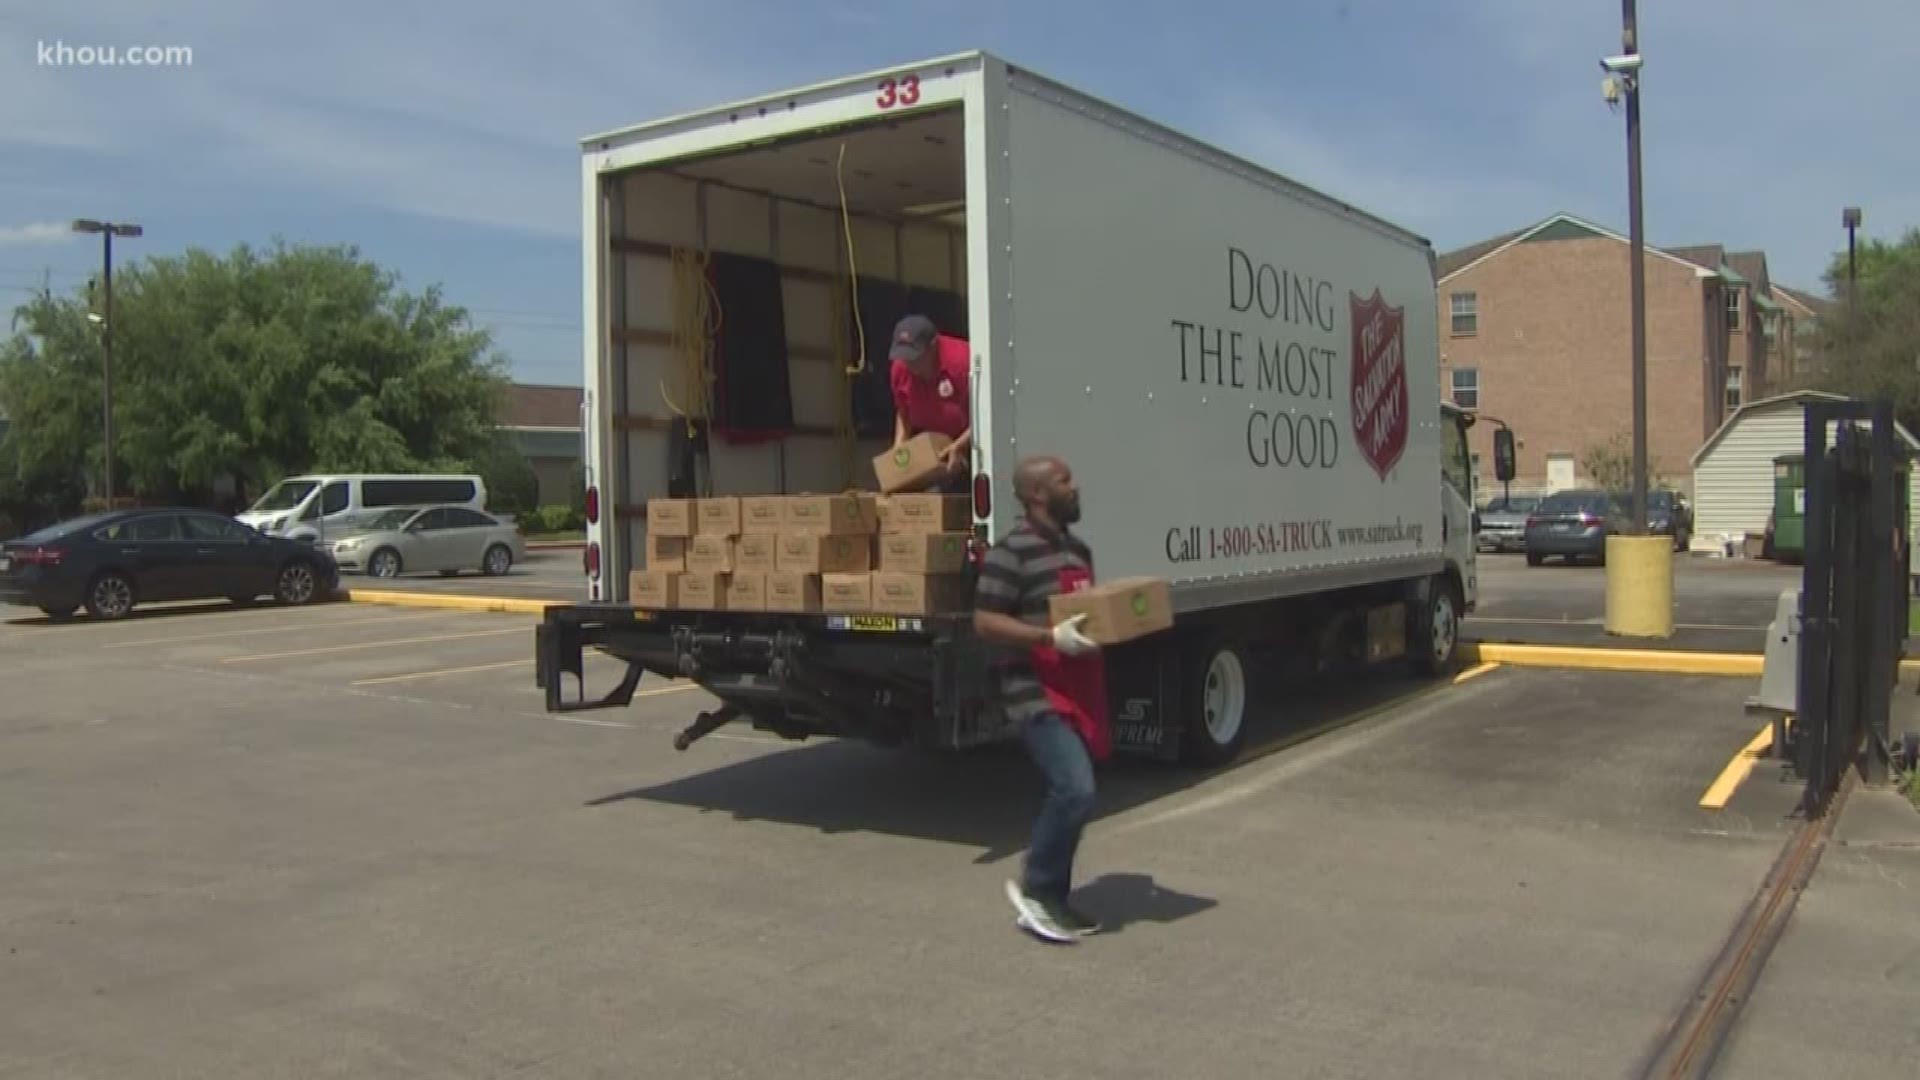 Heading into the weekend, local groups and organizations are doing what they can to ensure no one goes hungry.